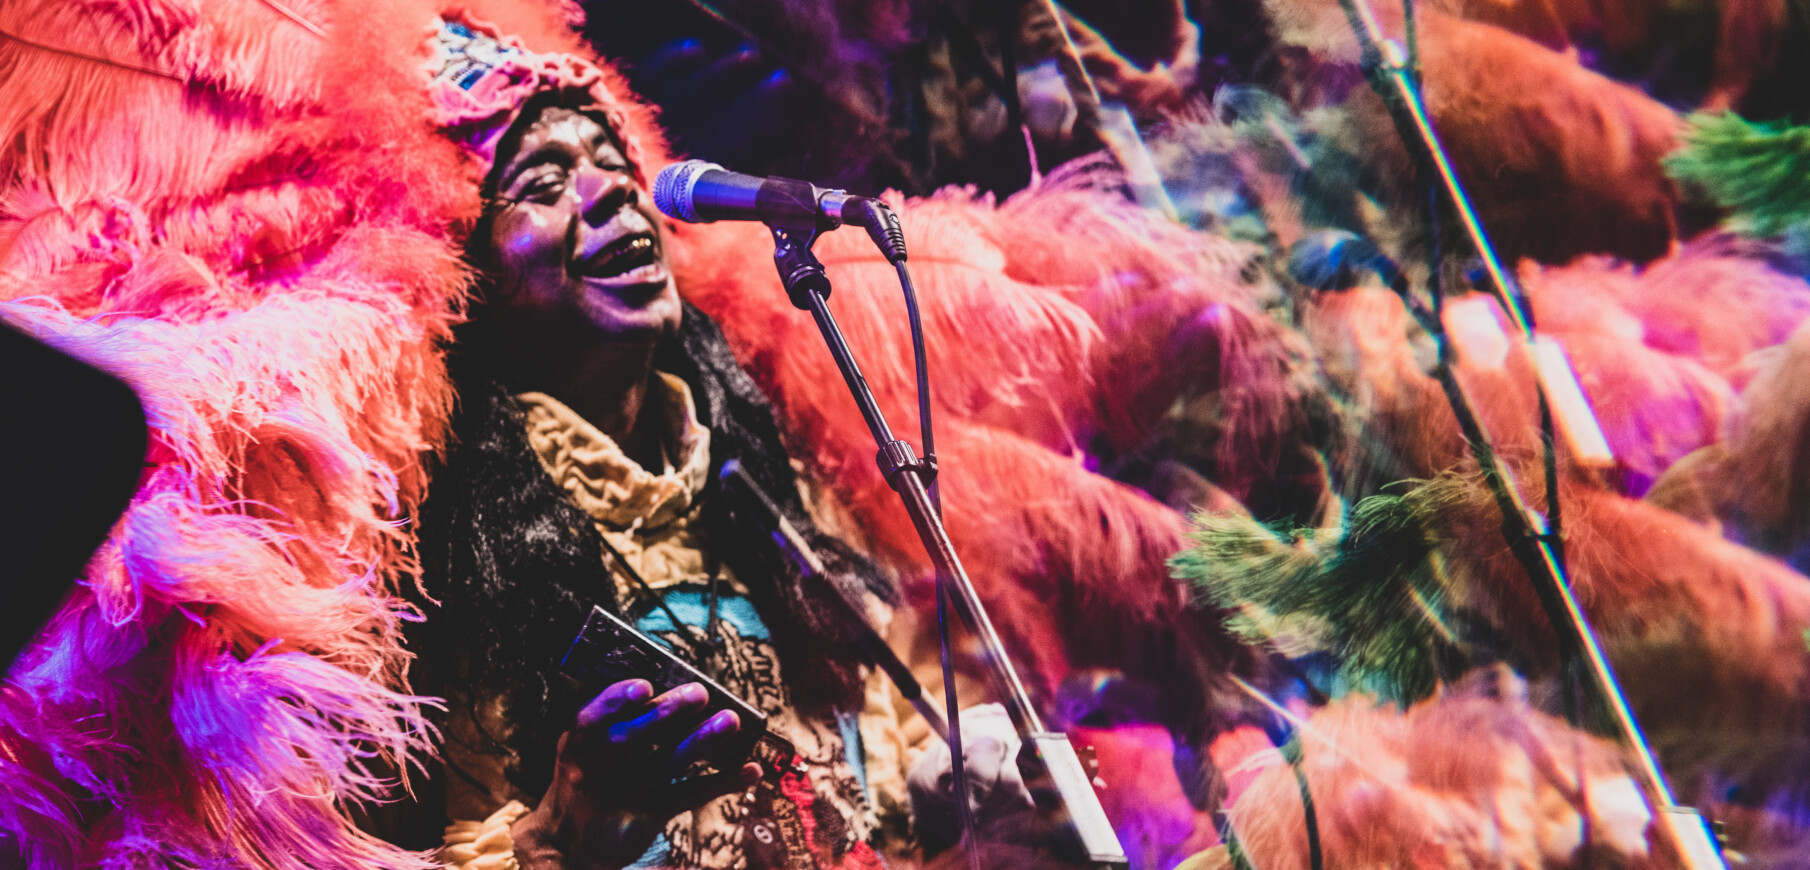 a dark skinned man wears a pink, purple, and green feathered headdress and coat and sings into a microphone